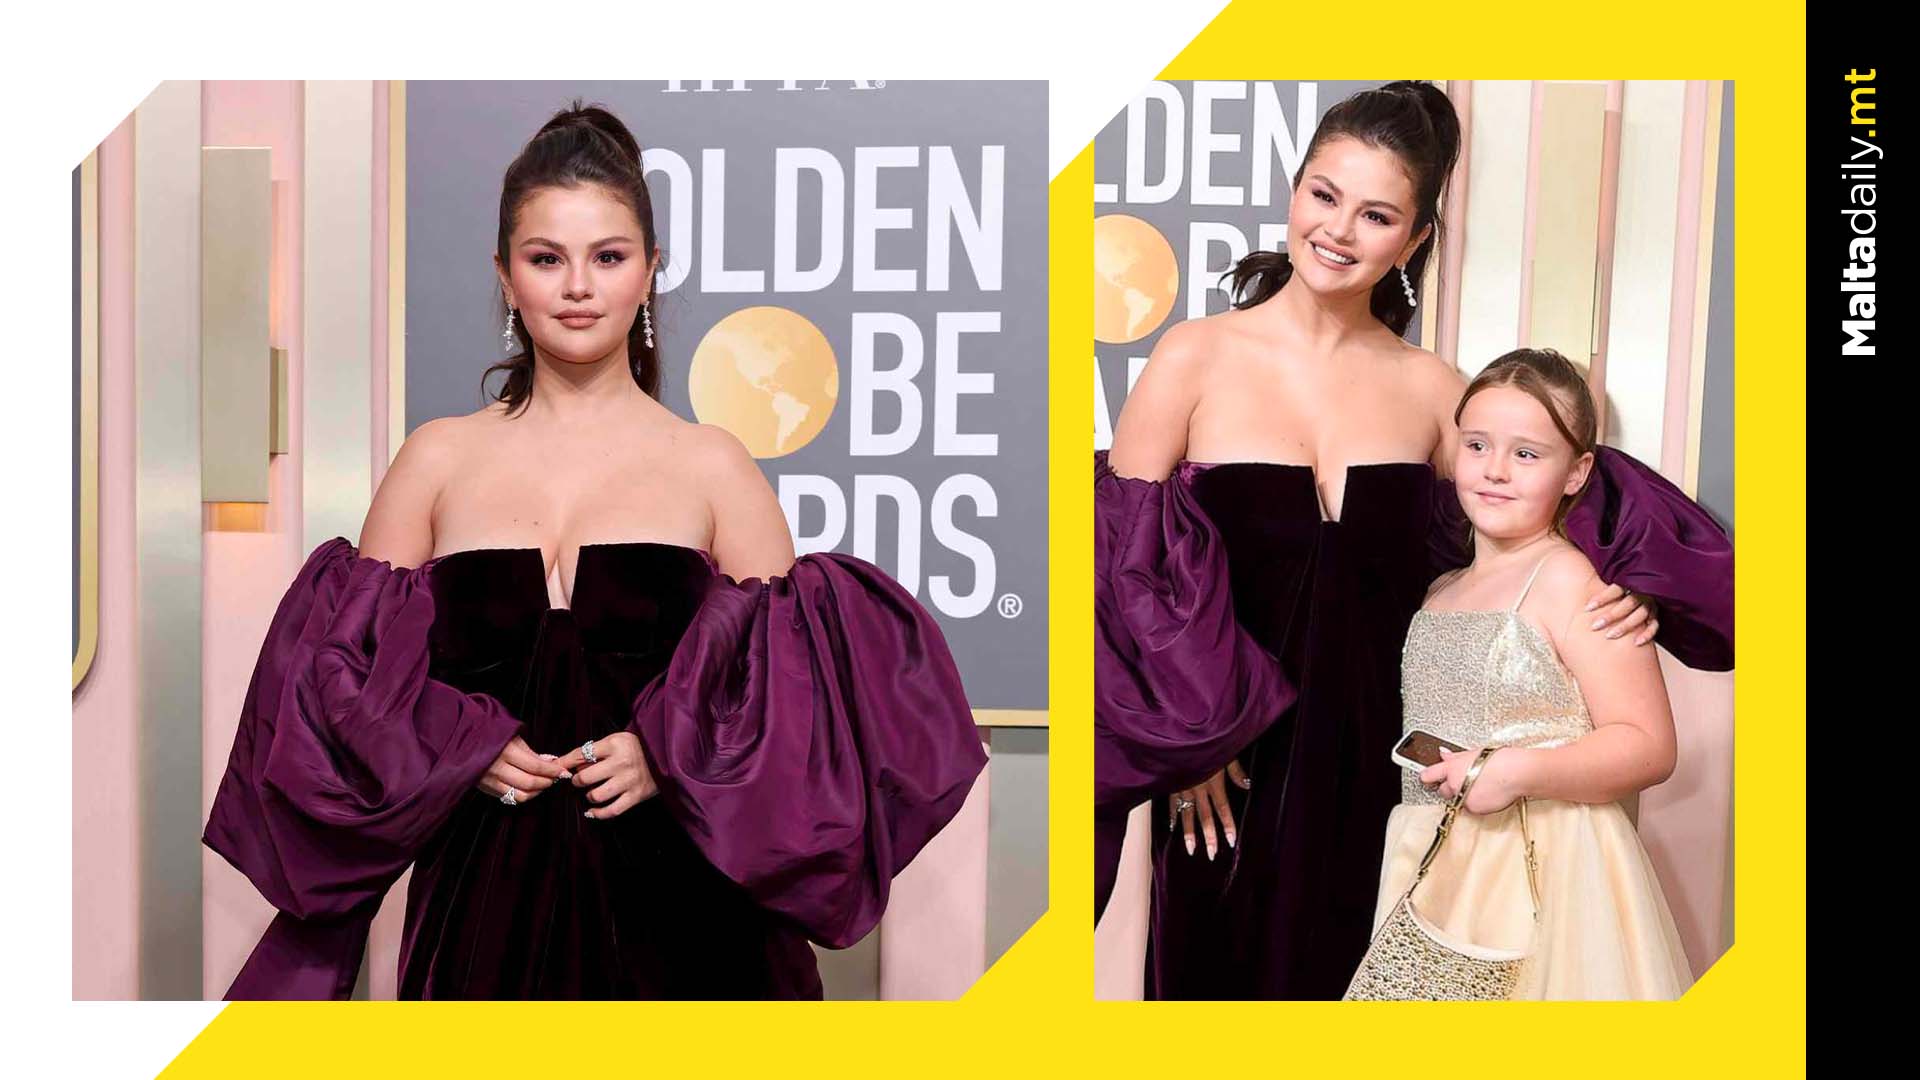 Selena Gomez hits back at body-shaming comments after Golden Globes